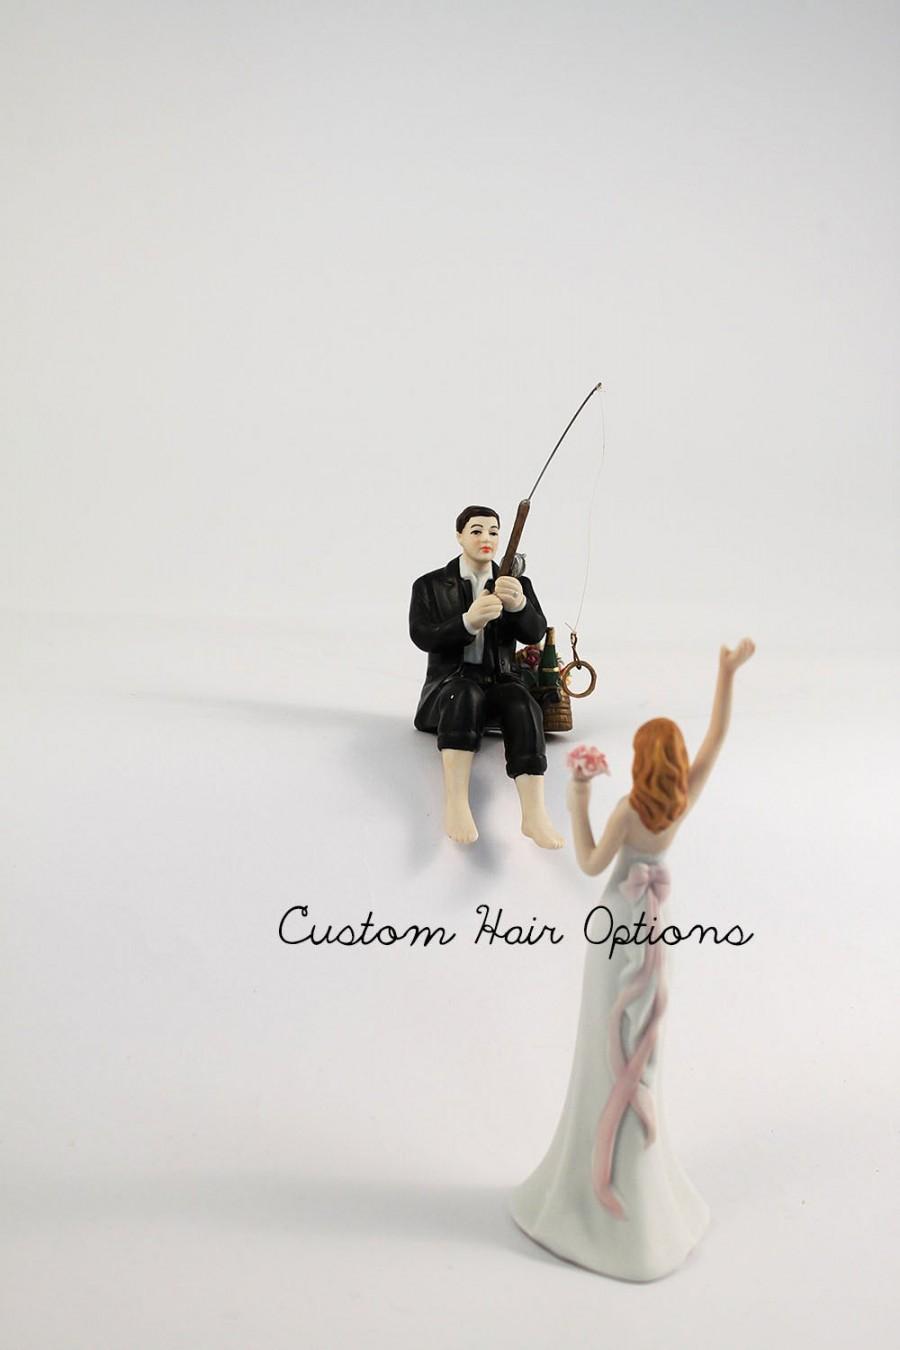 Wedding - Personalized Wedding Cake Topper - Hooked On Love Funny Bride and Groom - Custom - Porcelain Wedding Cake Topper - Humorous - Fishing